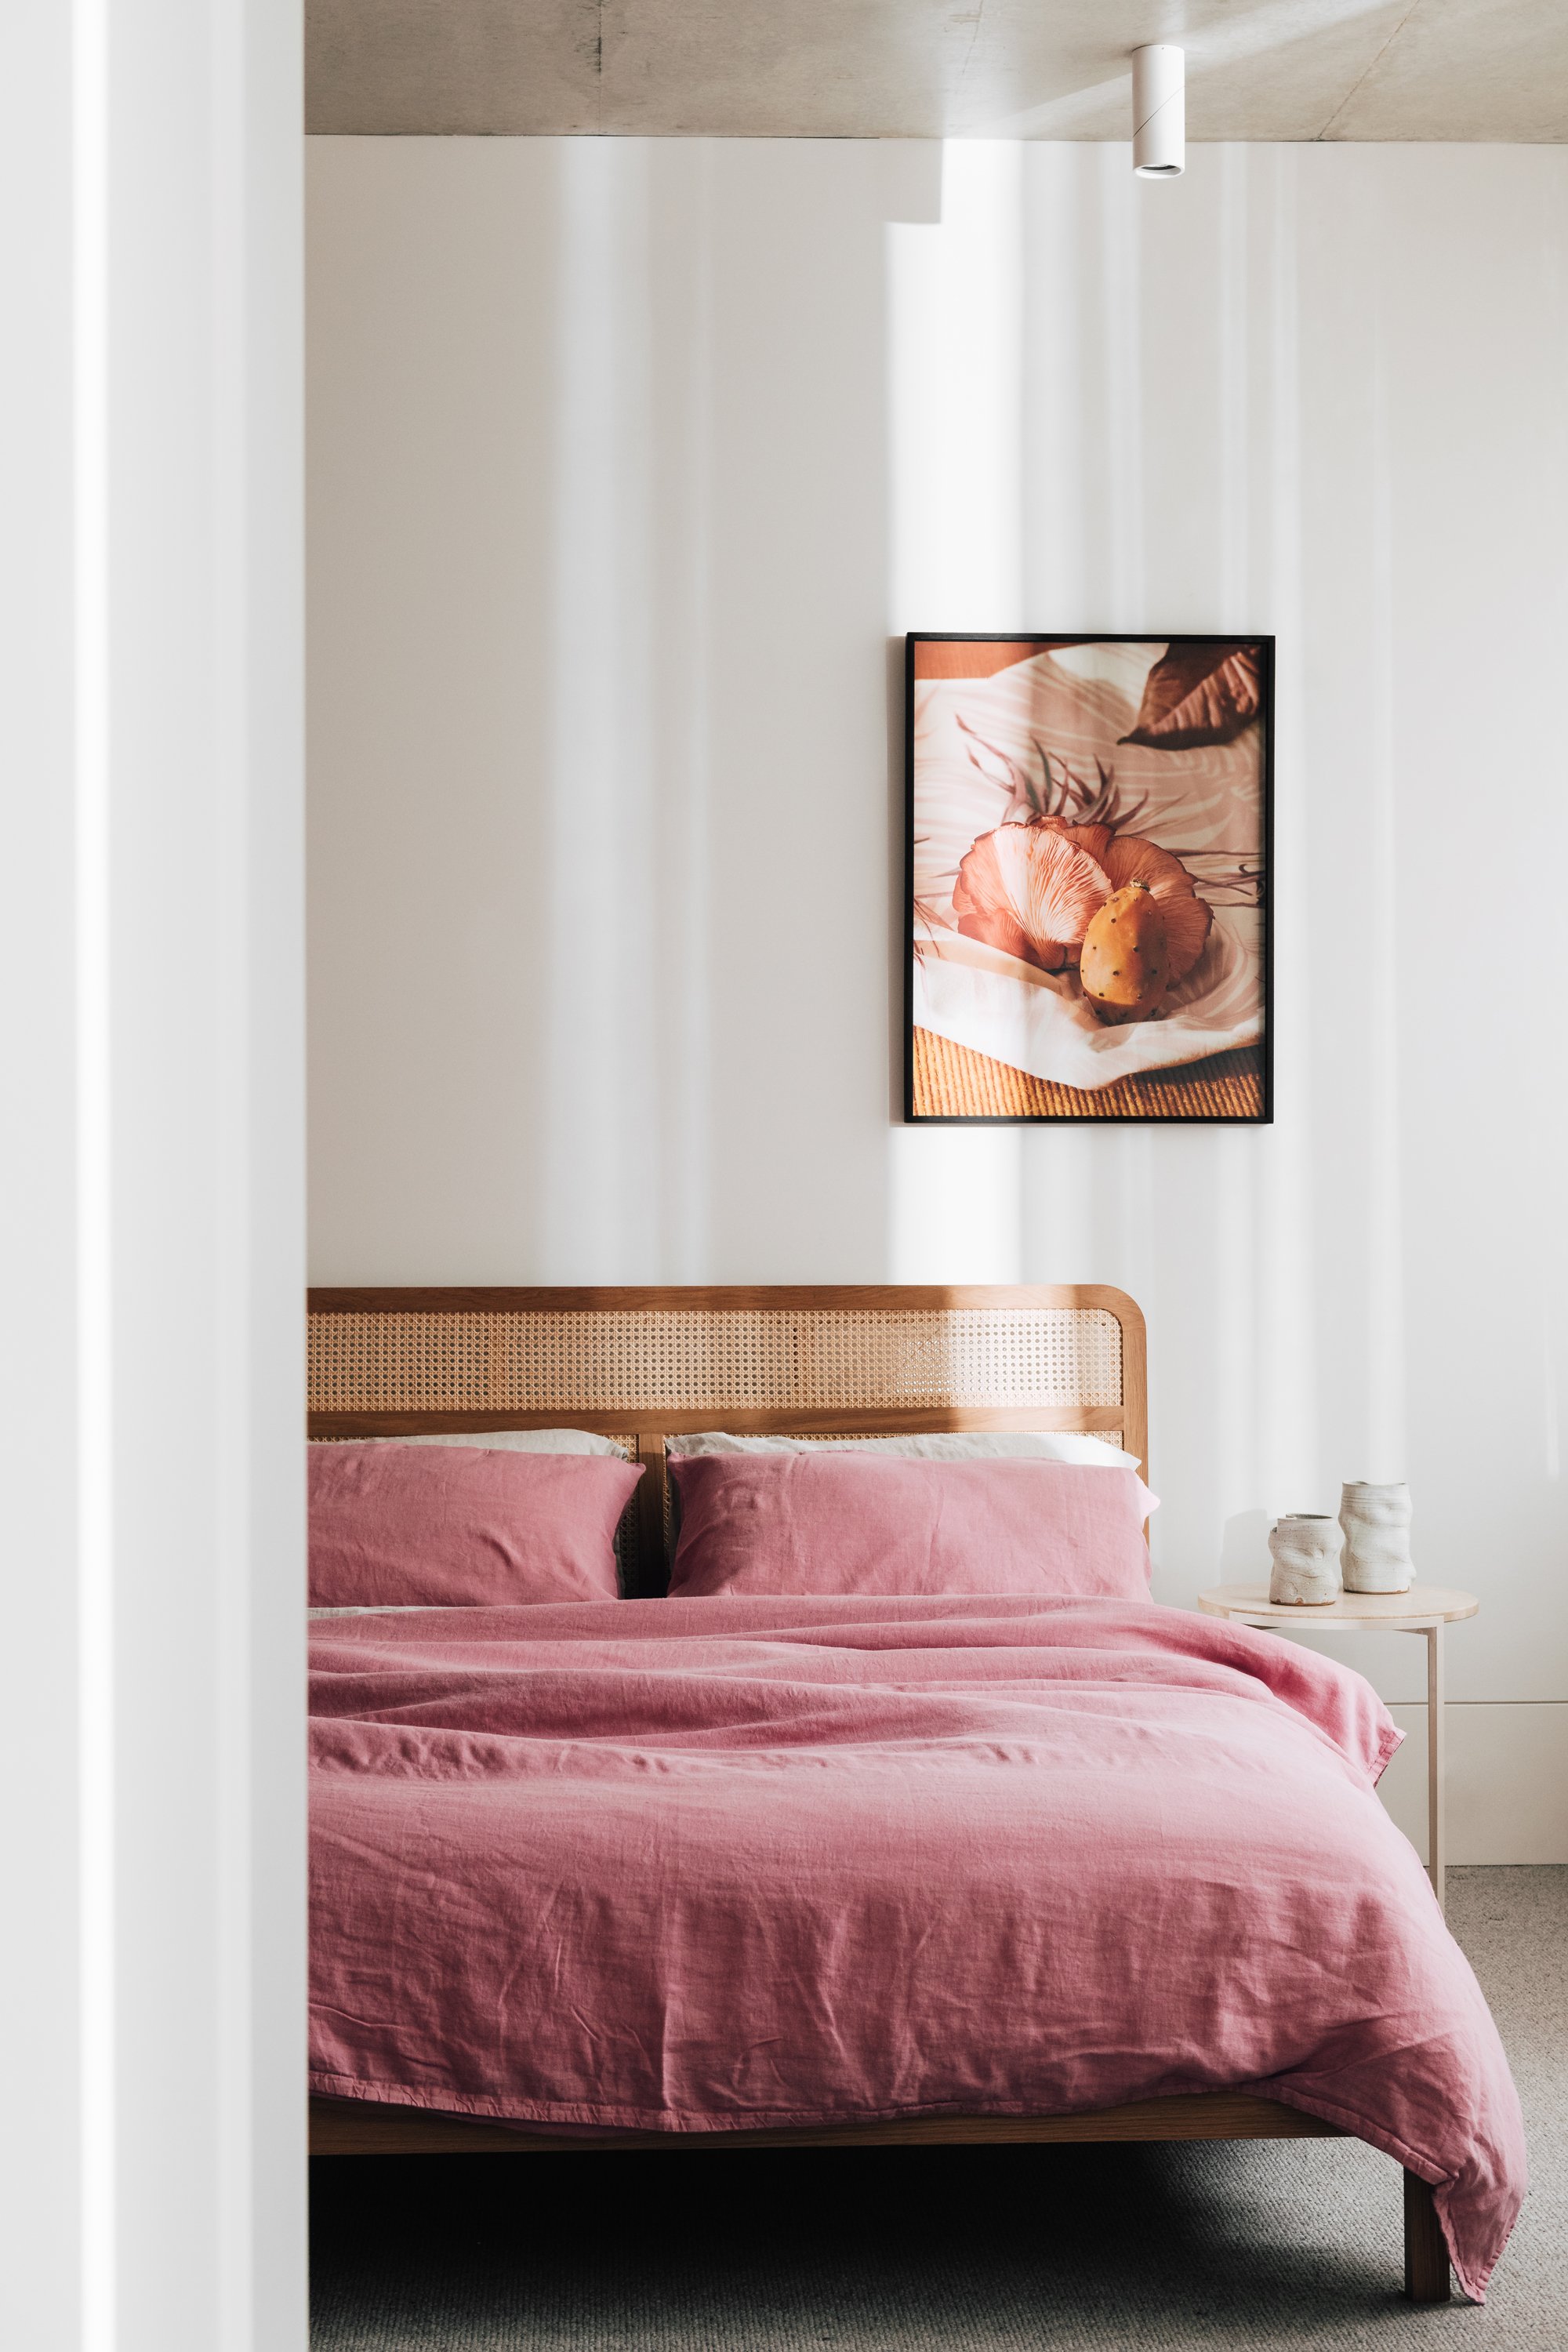 Willow Bed, Airo Rose Bed Linen, Alice Side Table, Kyokusen Vase's + Blush by Victoria Zschommler